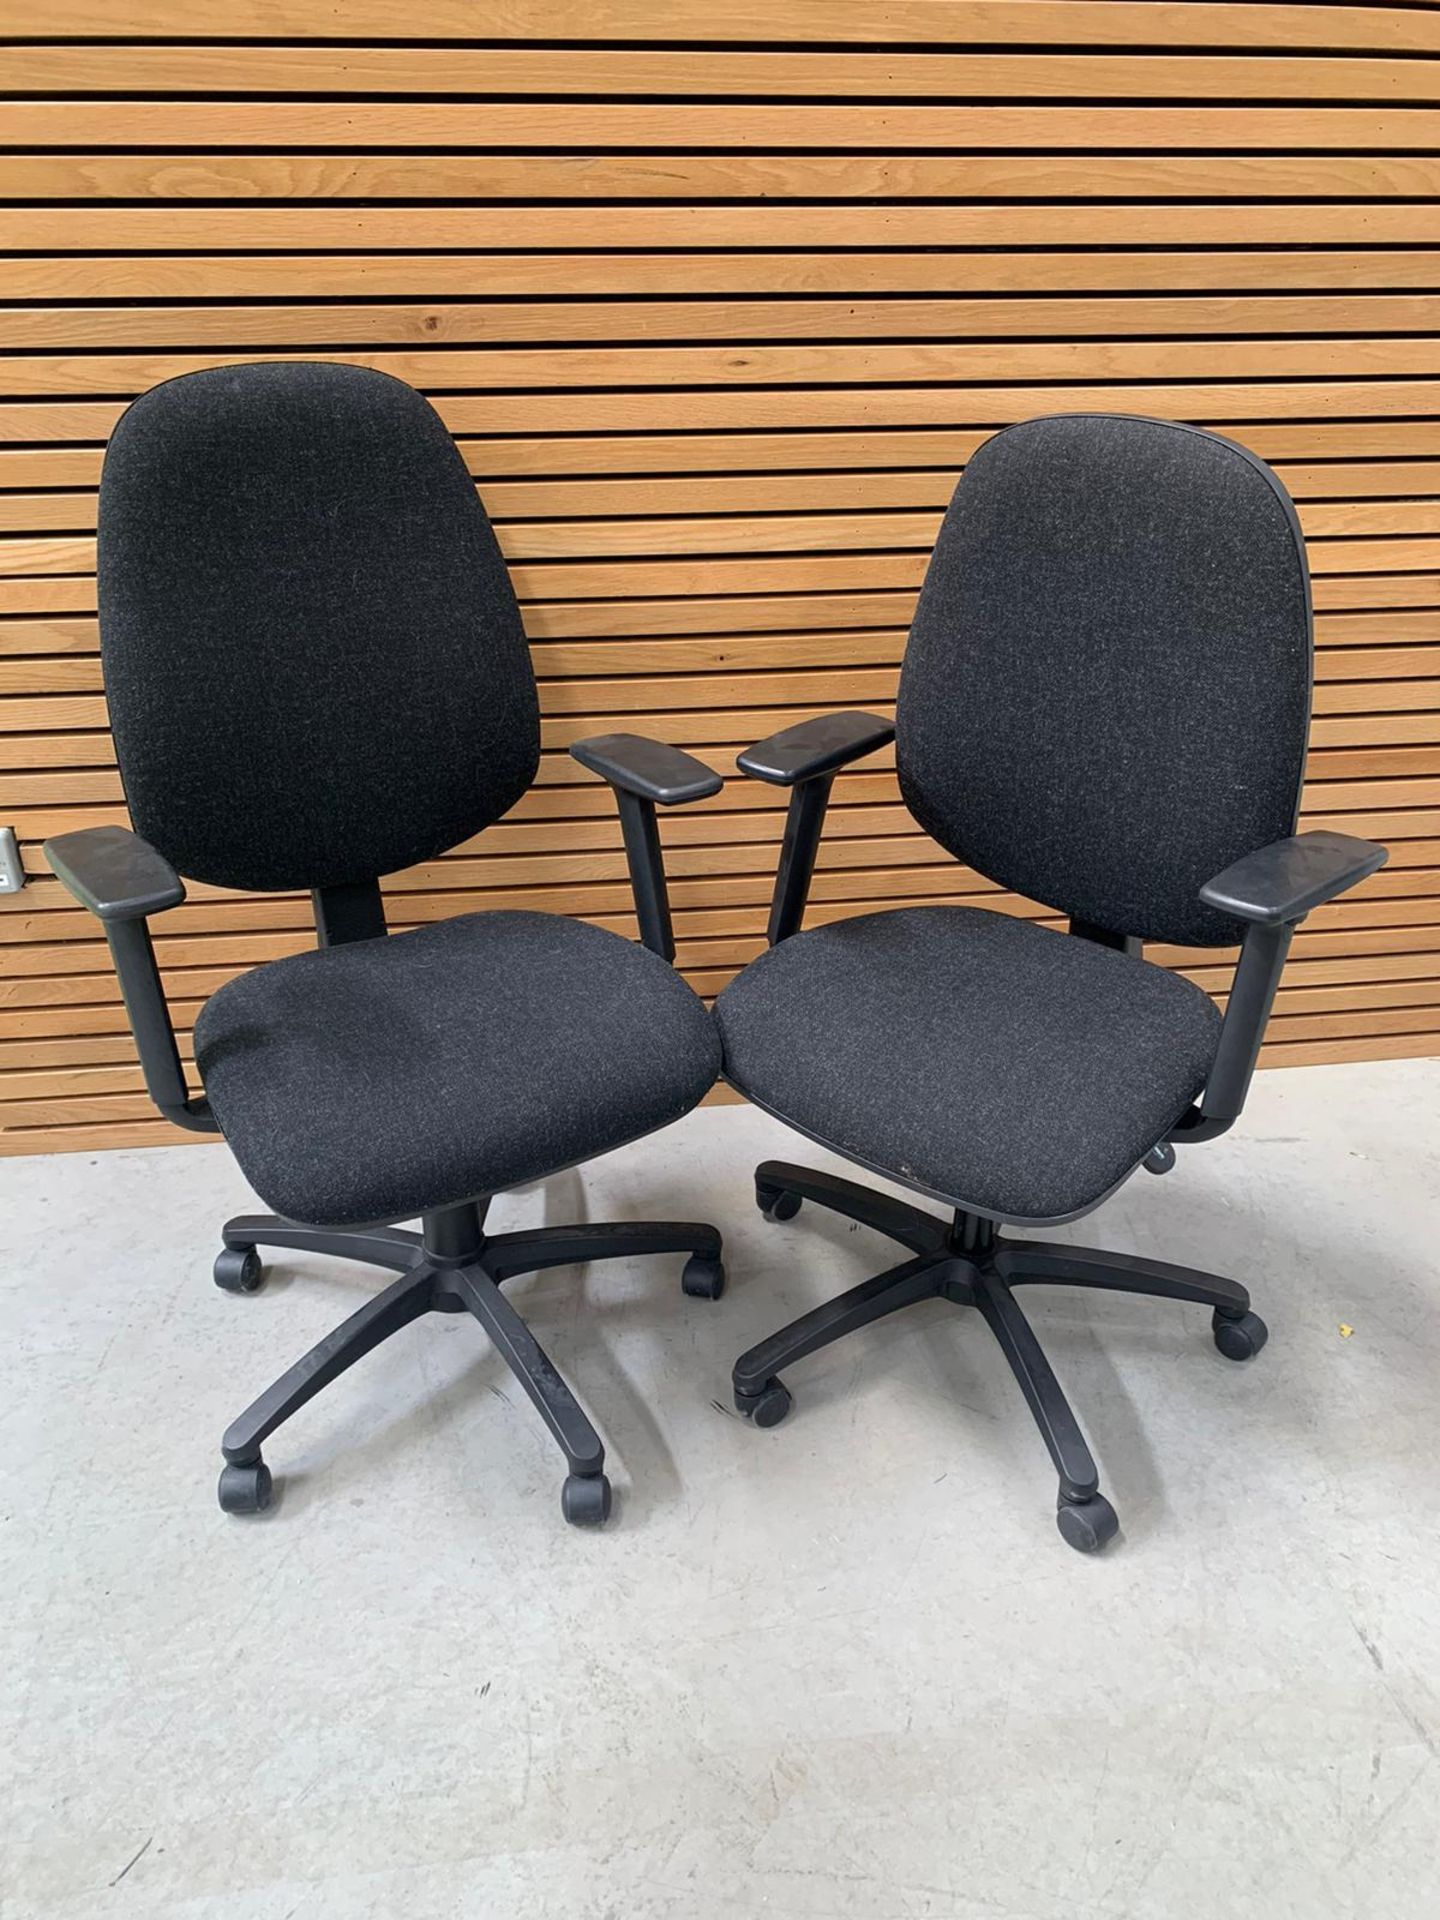 Black Commercial Grade Office Chair - Image 2 of 8